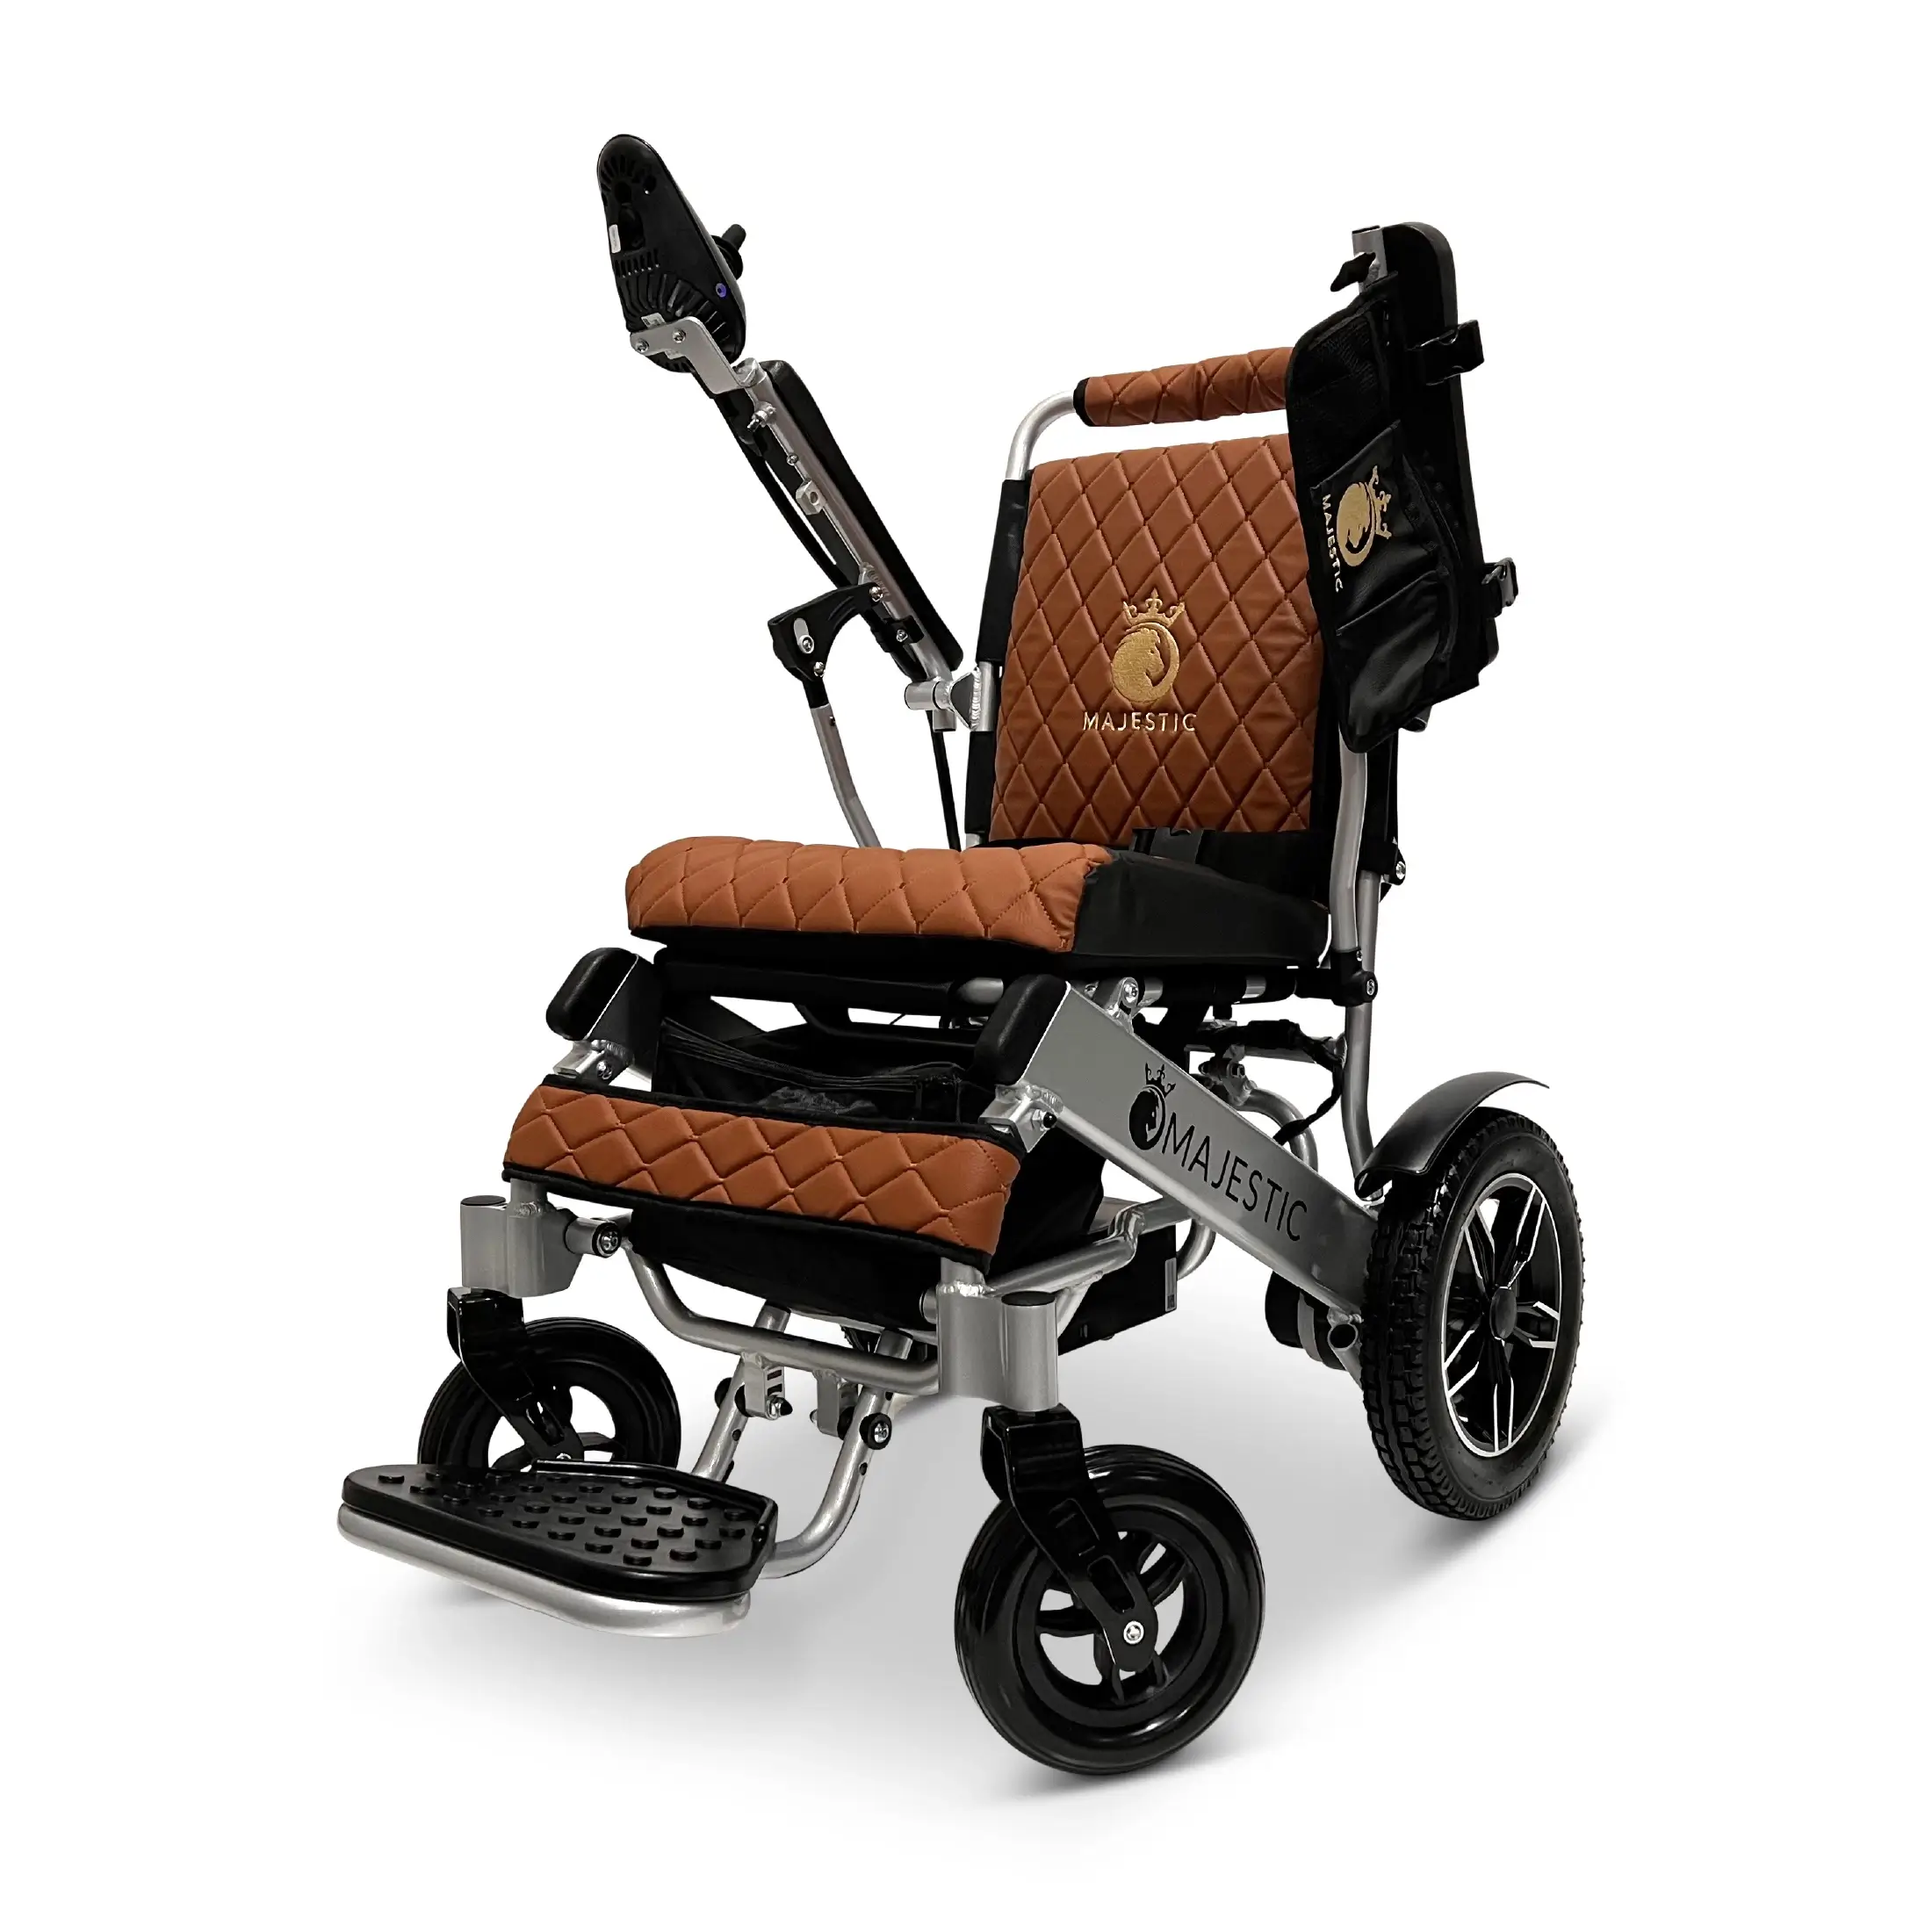 MAJESTIC IQ-8000 Remote Controlled Lightweight Electric Wheelchair